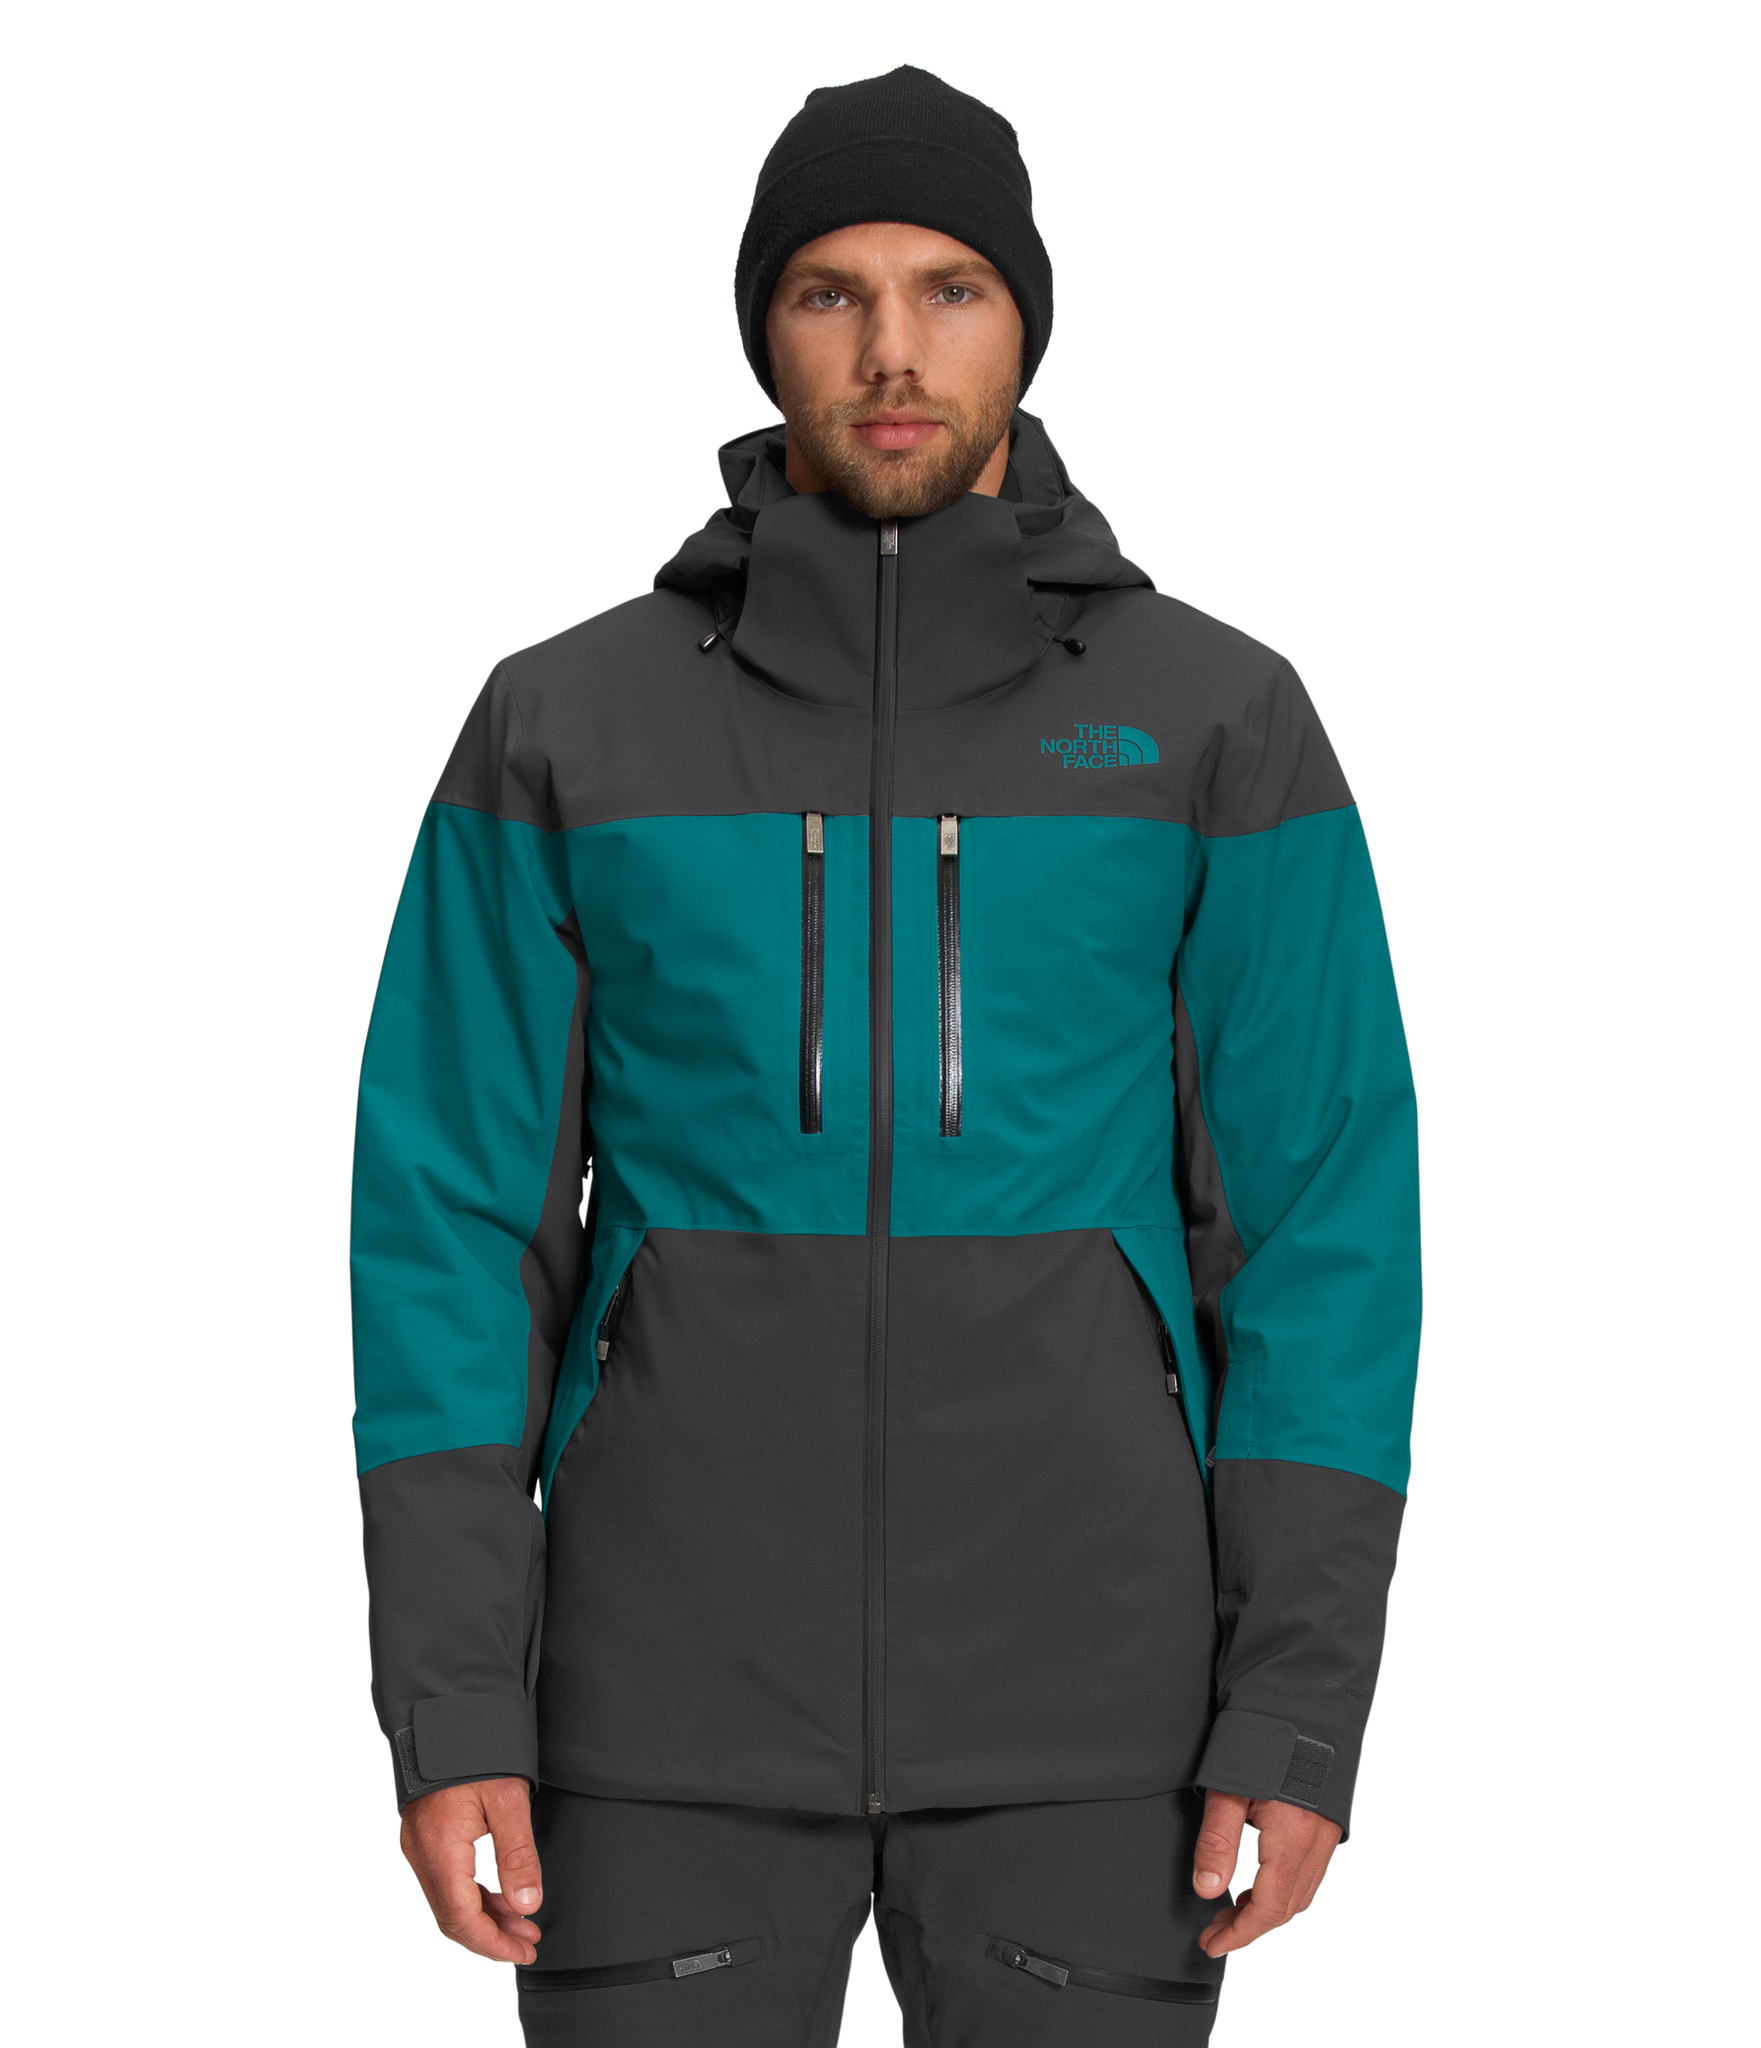 Men's Chakal Jacket - The Benchmark Outdoor Outfitters